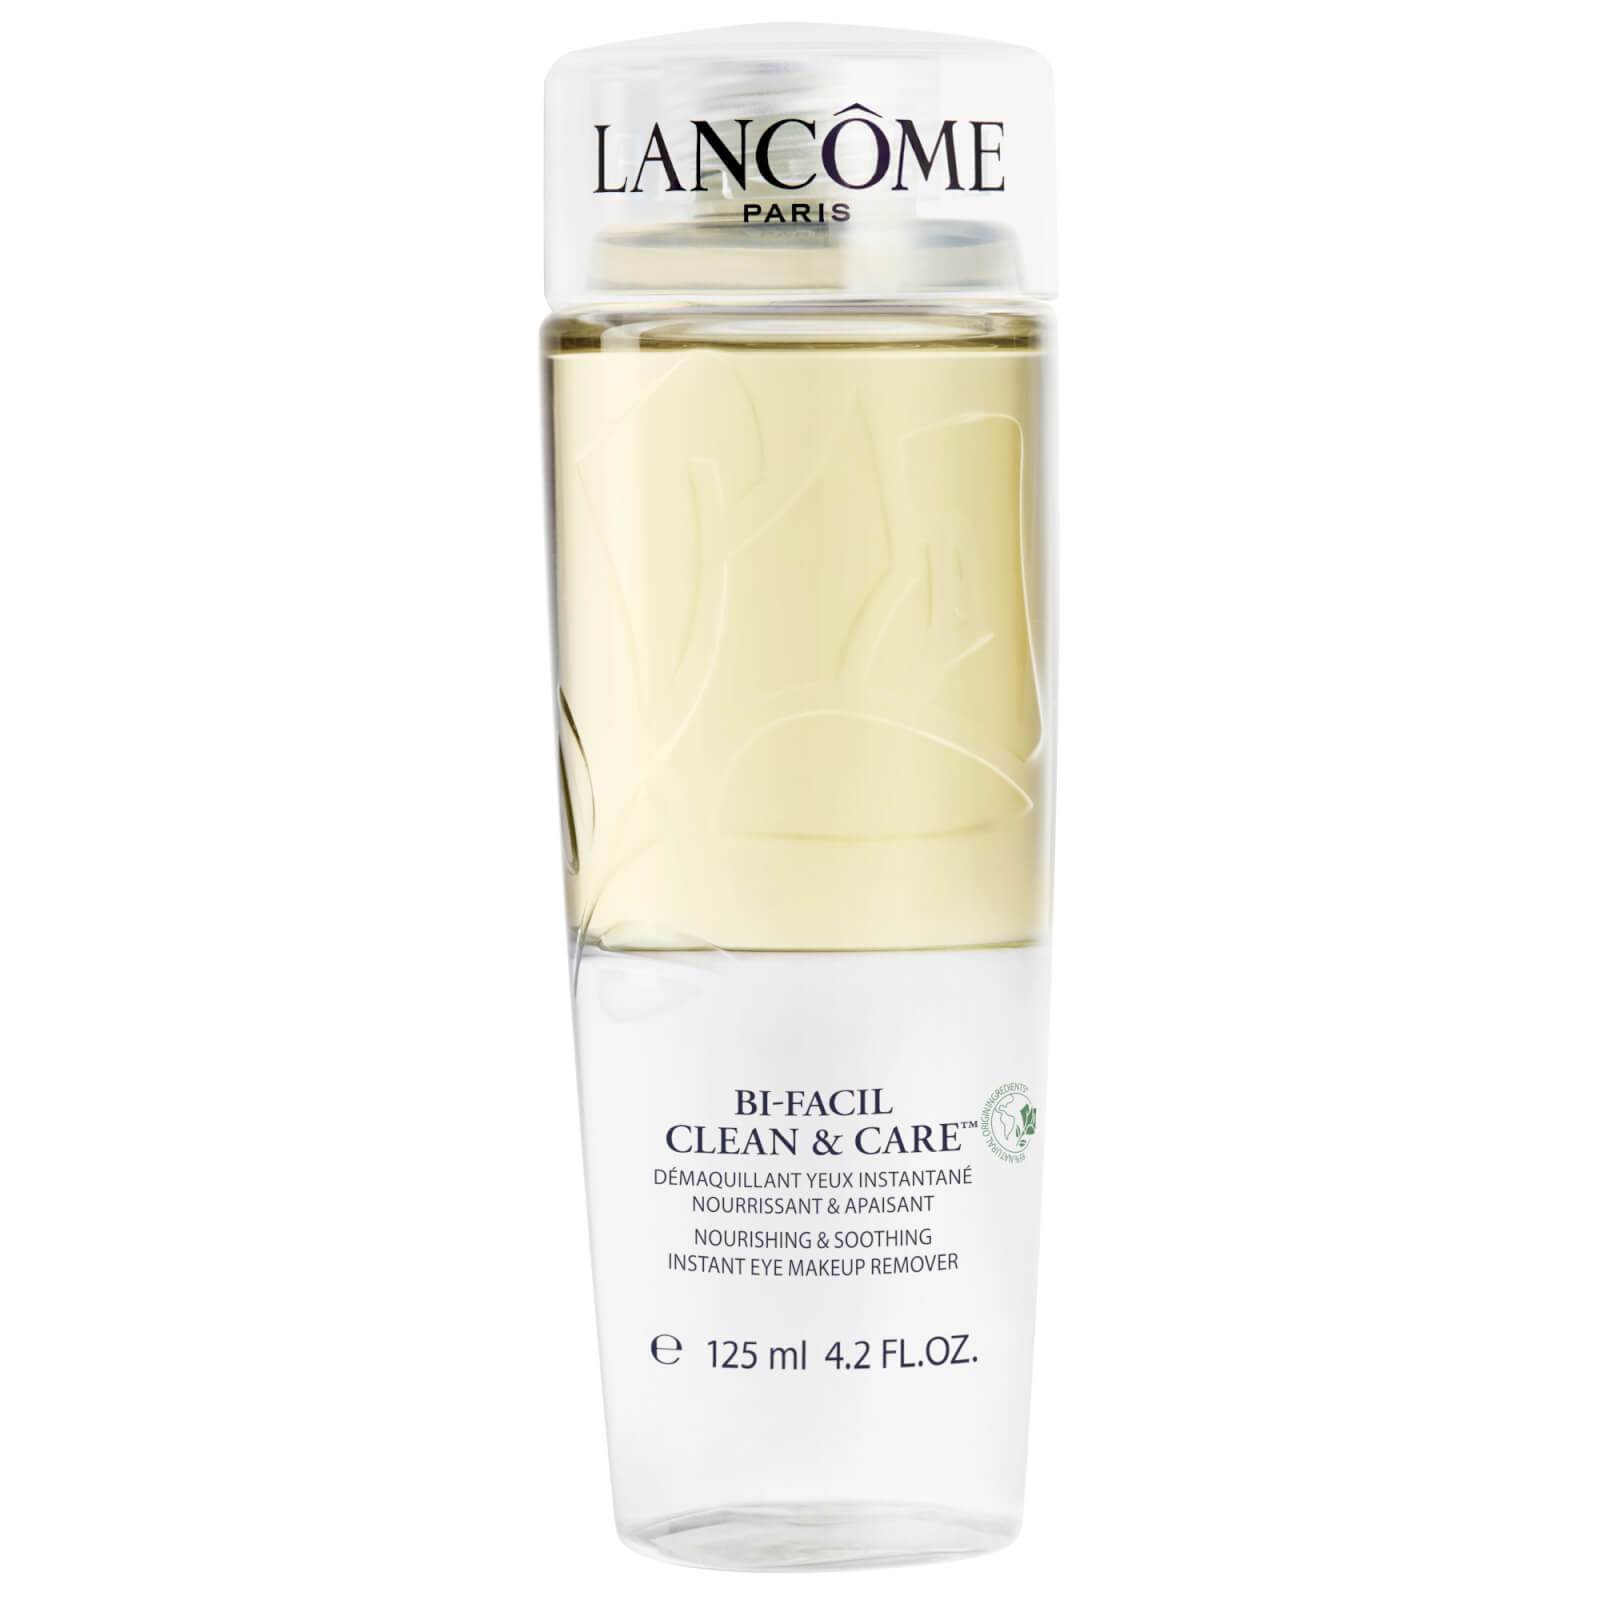 Lancome BI-Facil Clean and Care Nourishing and Soothing Instant Eye Makeup Remover 125ml